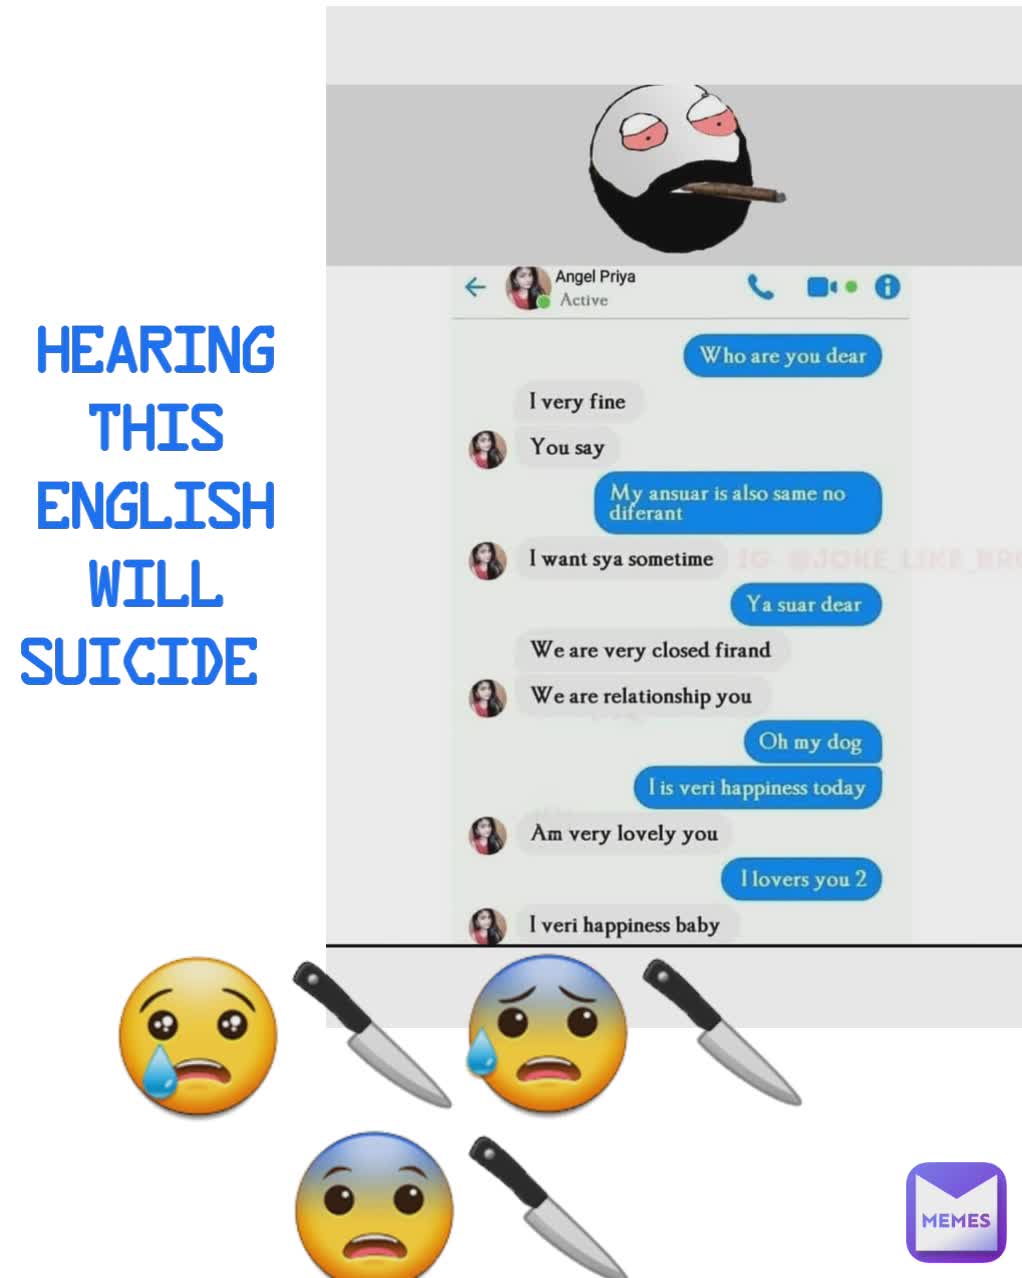 Hearing this English will suicide  😰🔪😢🔪😨🔪 😢🔪😰🔪😨🔪